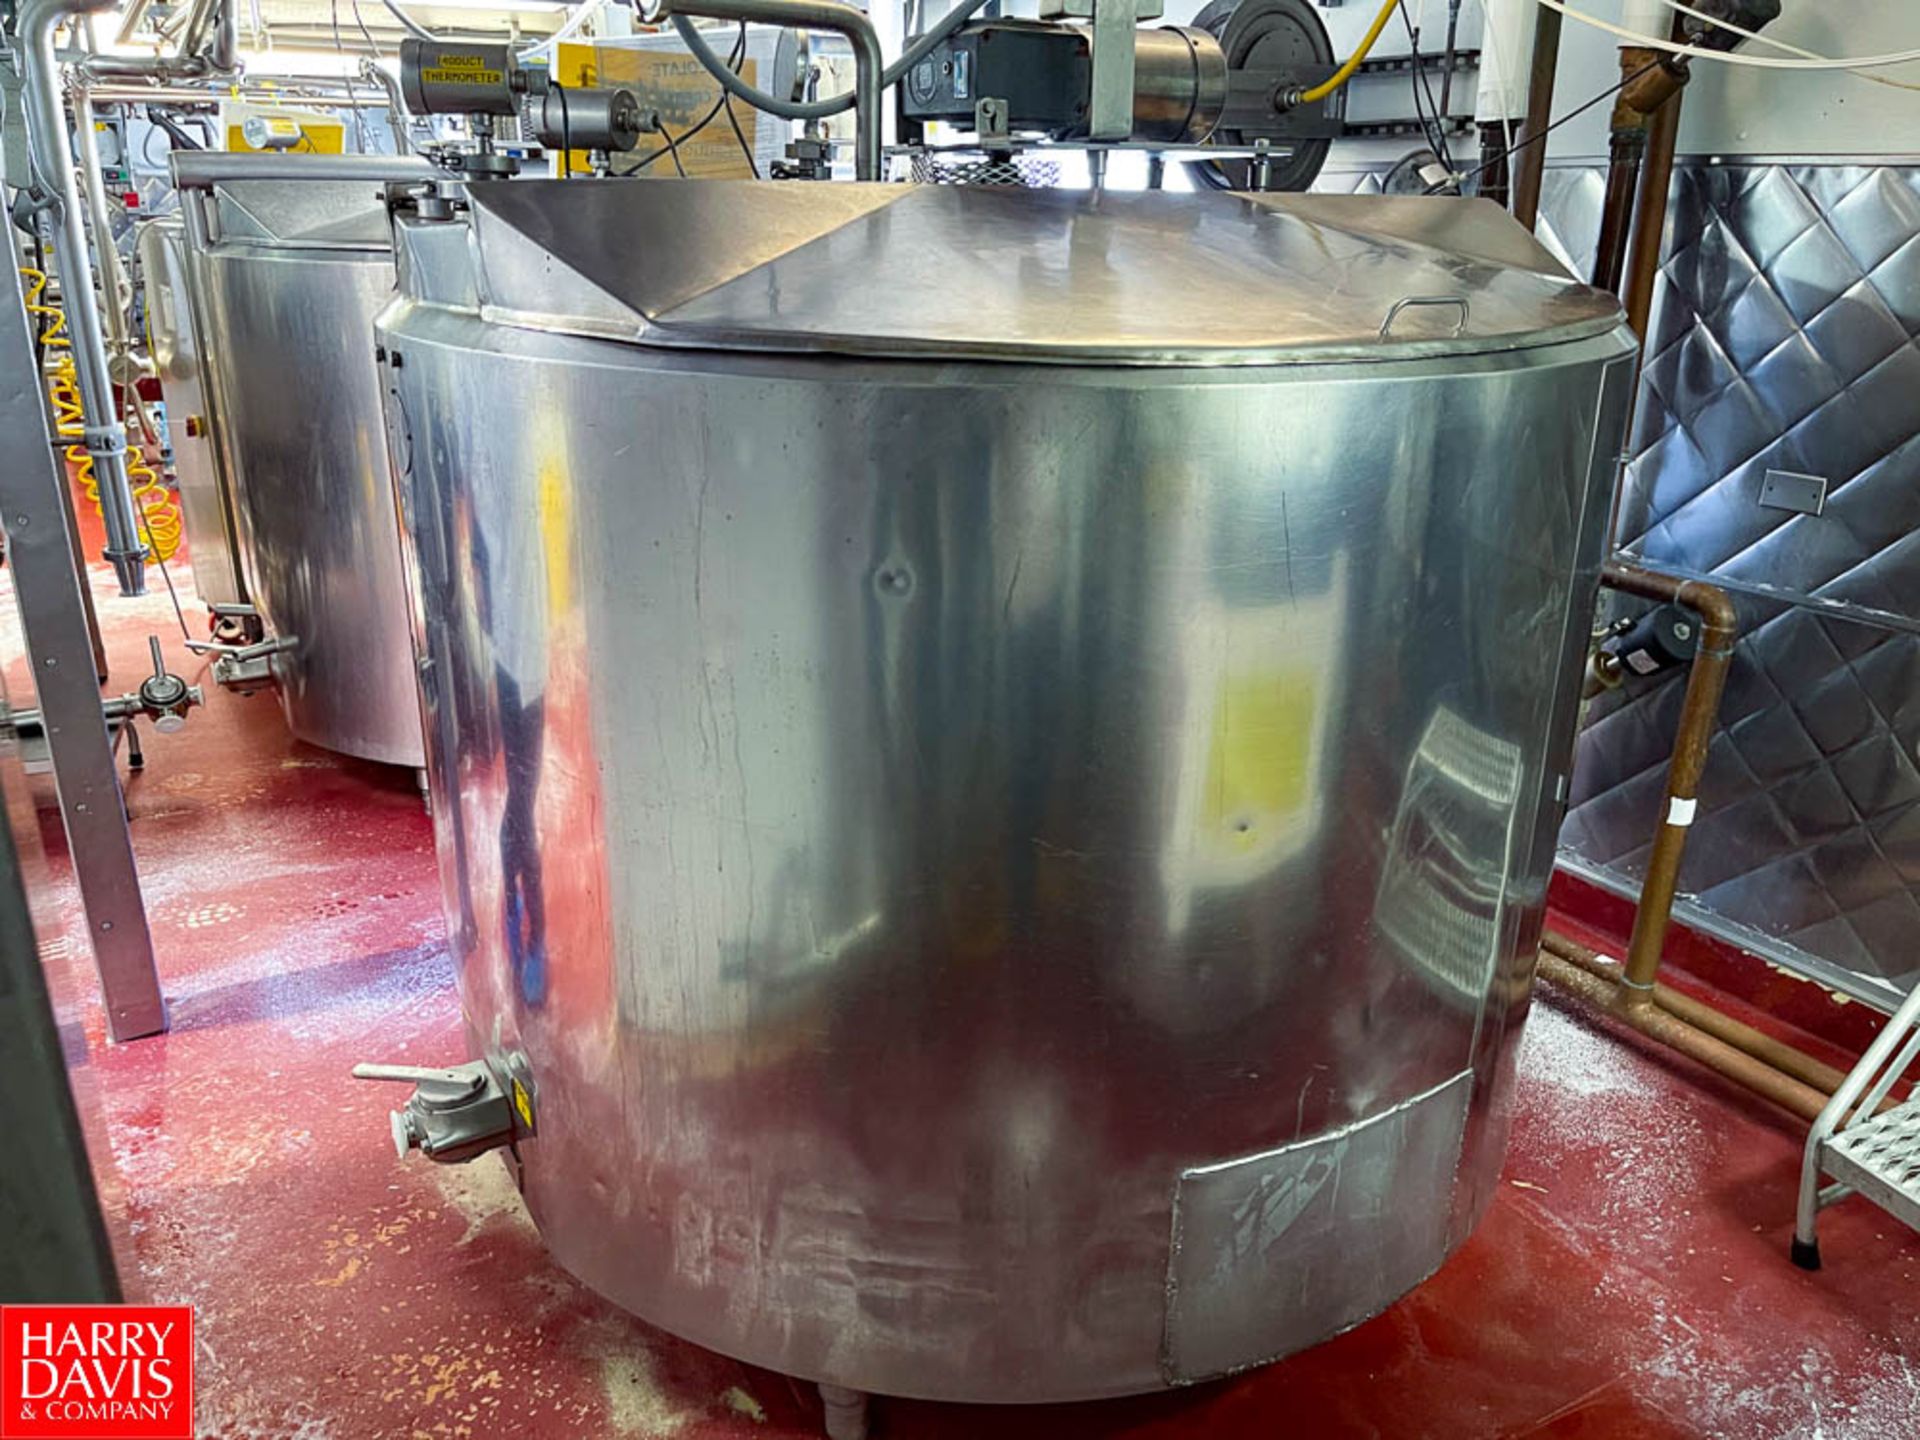 500 Gallon Dual Hinged-Lid Jacketed S/S Vat Pasteurizer (Vat # 7), with Vertical Agitation, S/S Leak